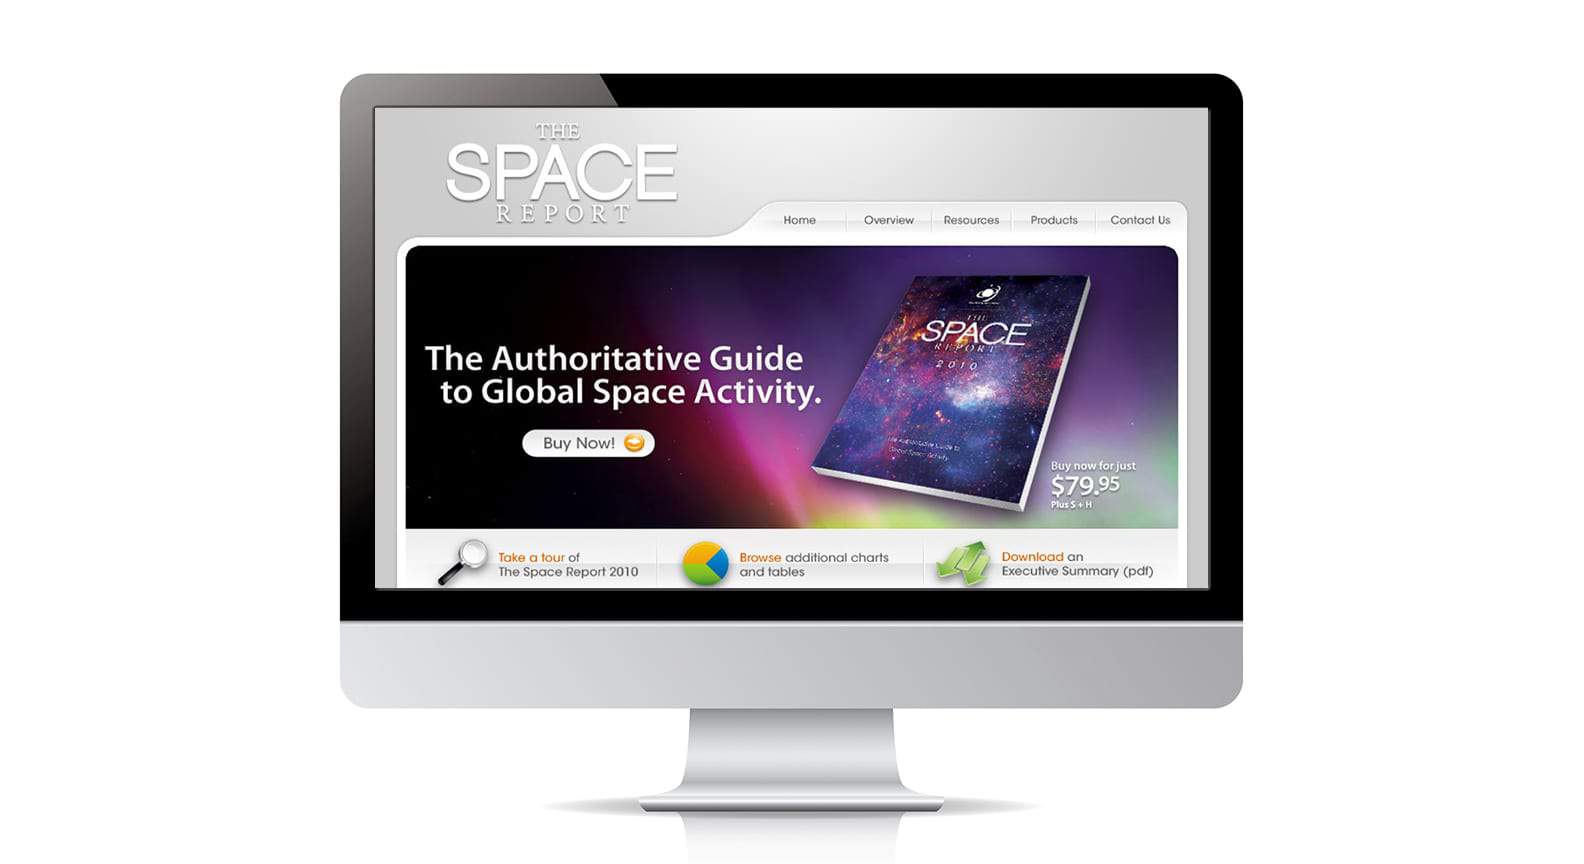 WOW Factor Digital Marketing Agency - The Space Report